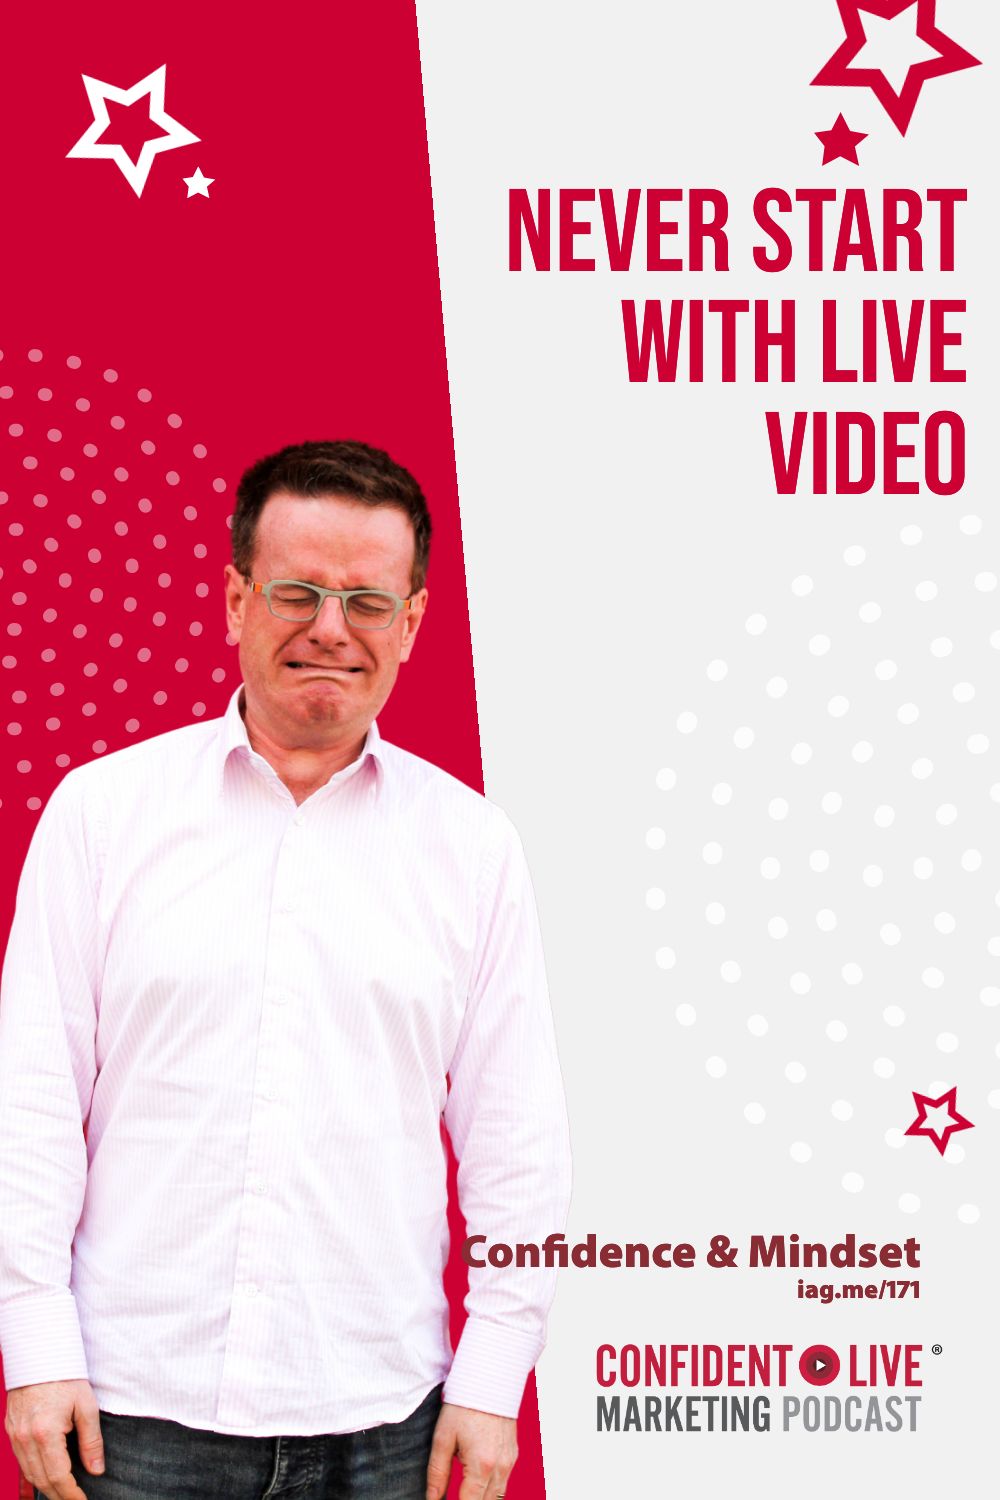 Never Start with Live Video